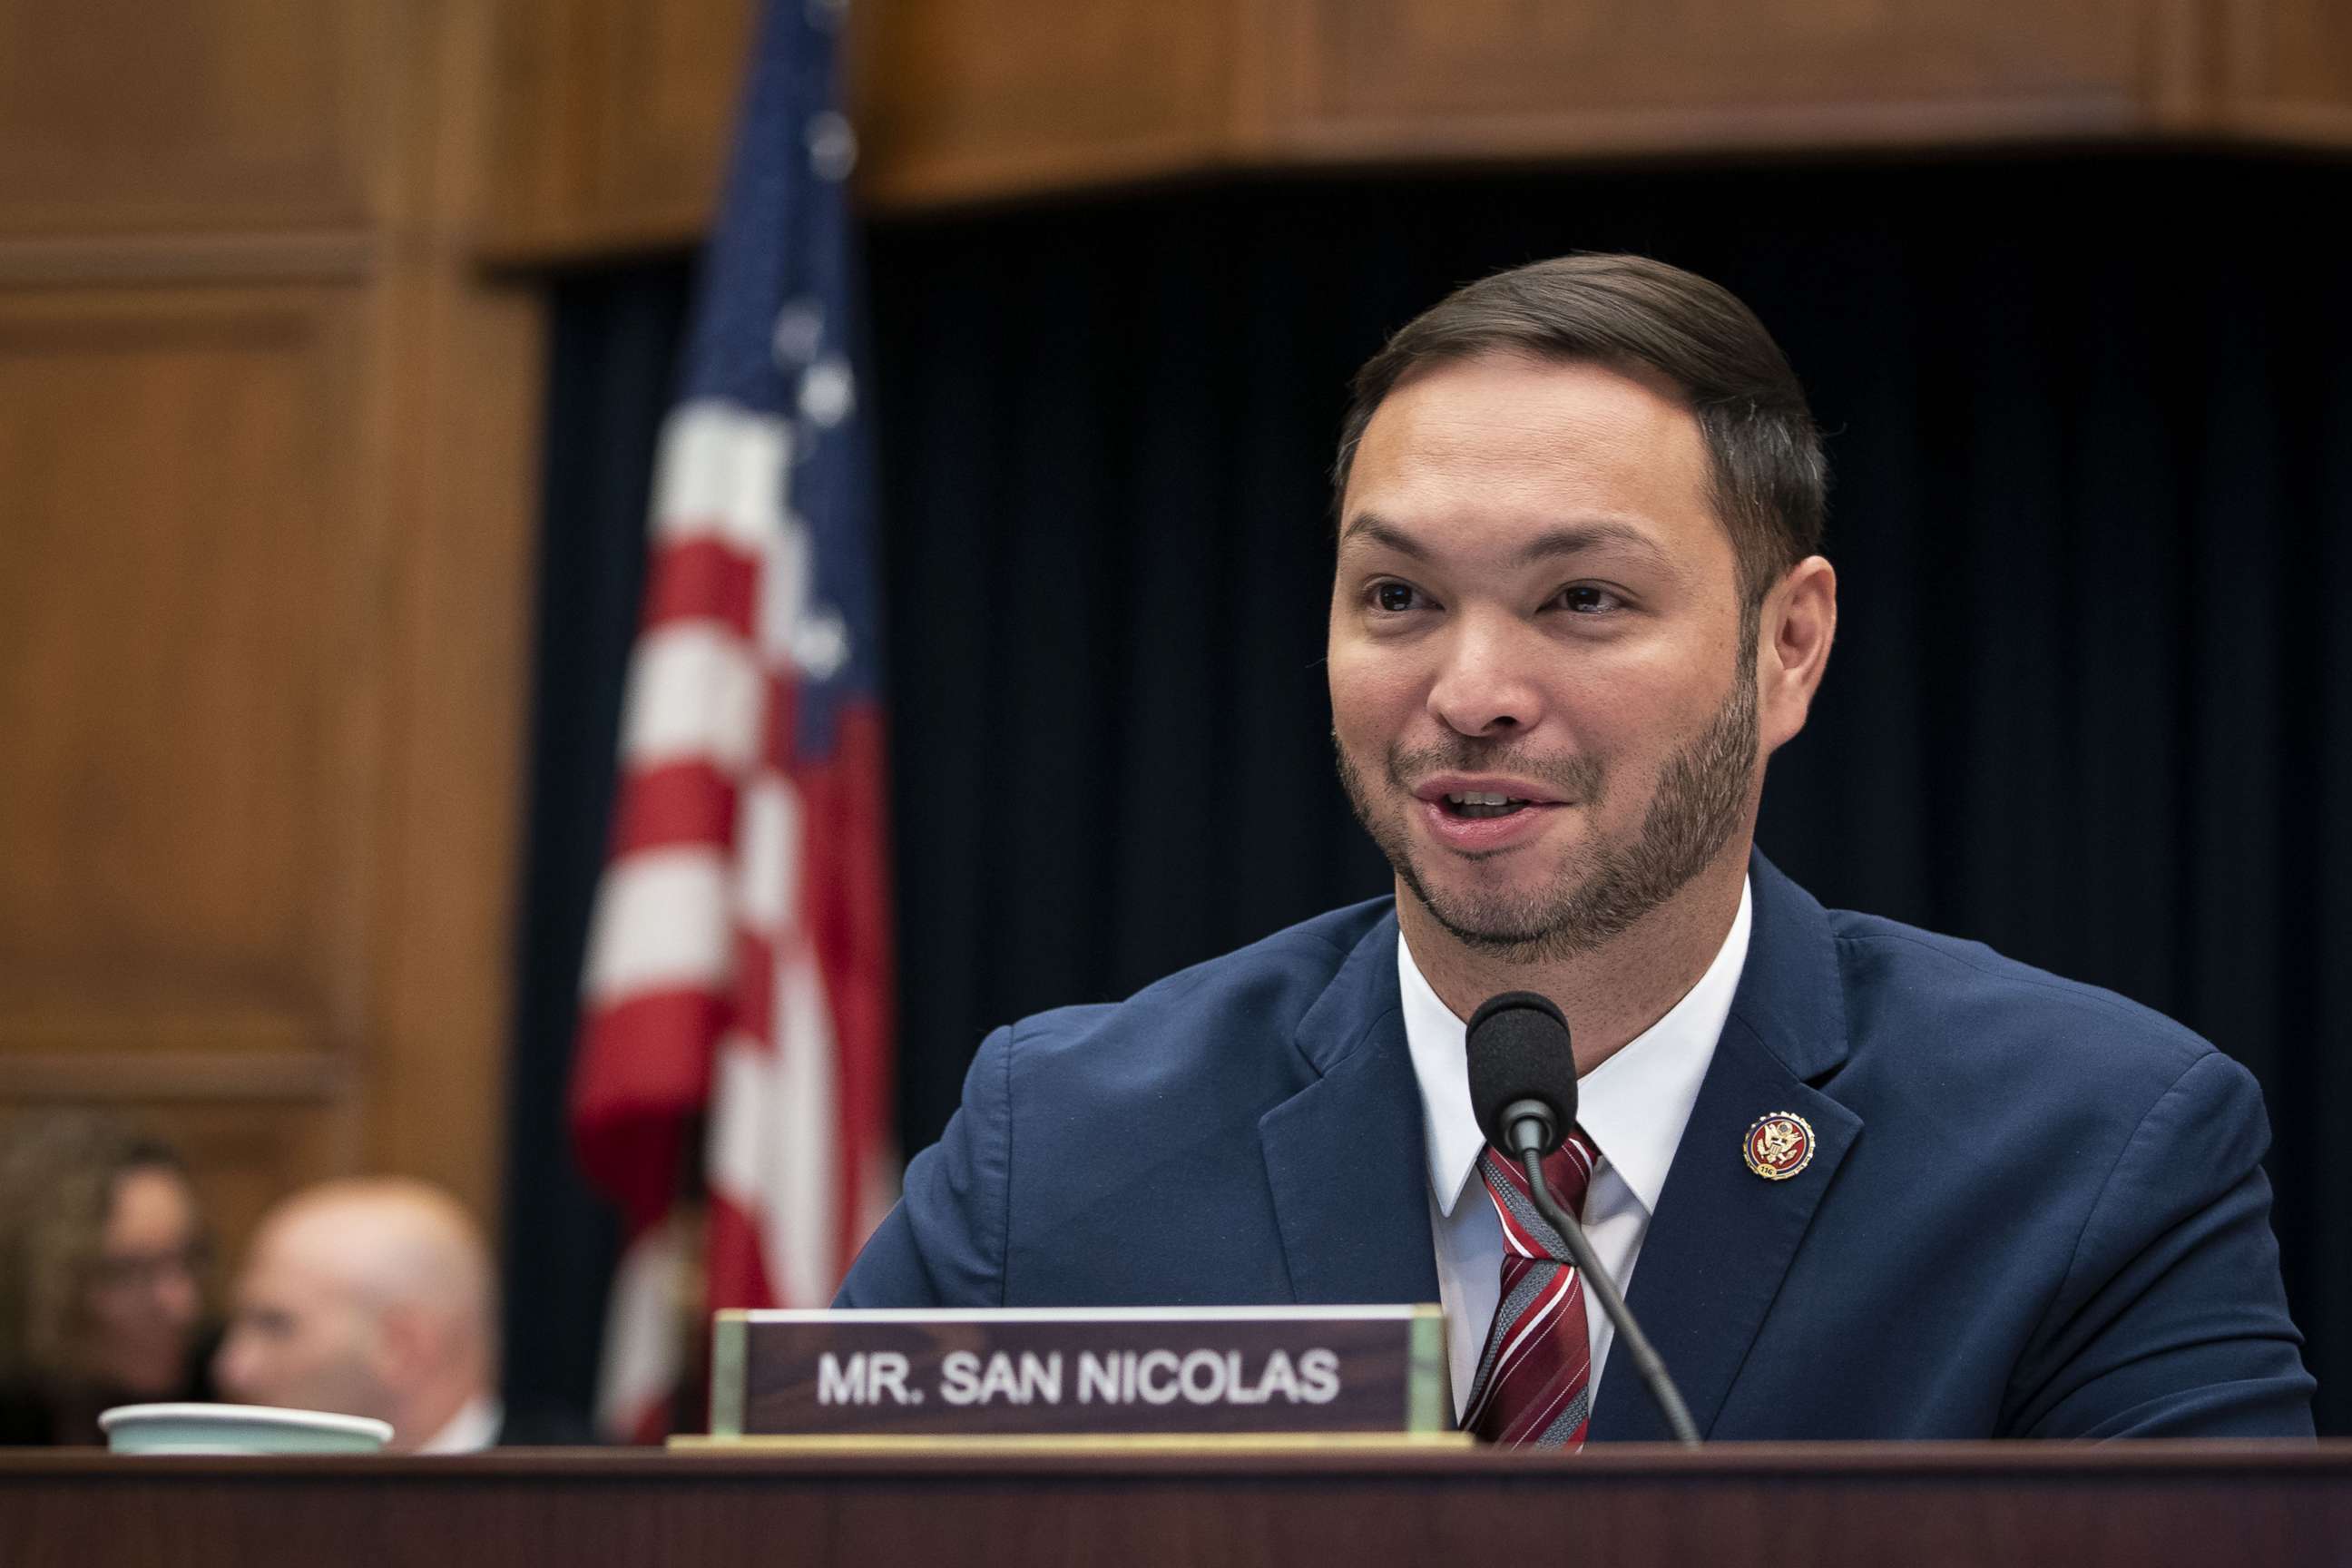 PHOTO: Representative Michael San Nicolas, a Democrat from Guam, speaks during a House Financial Services Committee hearing in Washington, D.C., on Oct. 23, 2019.